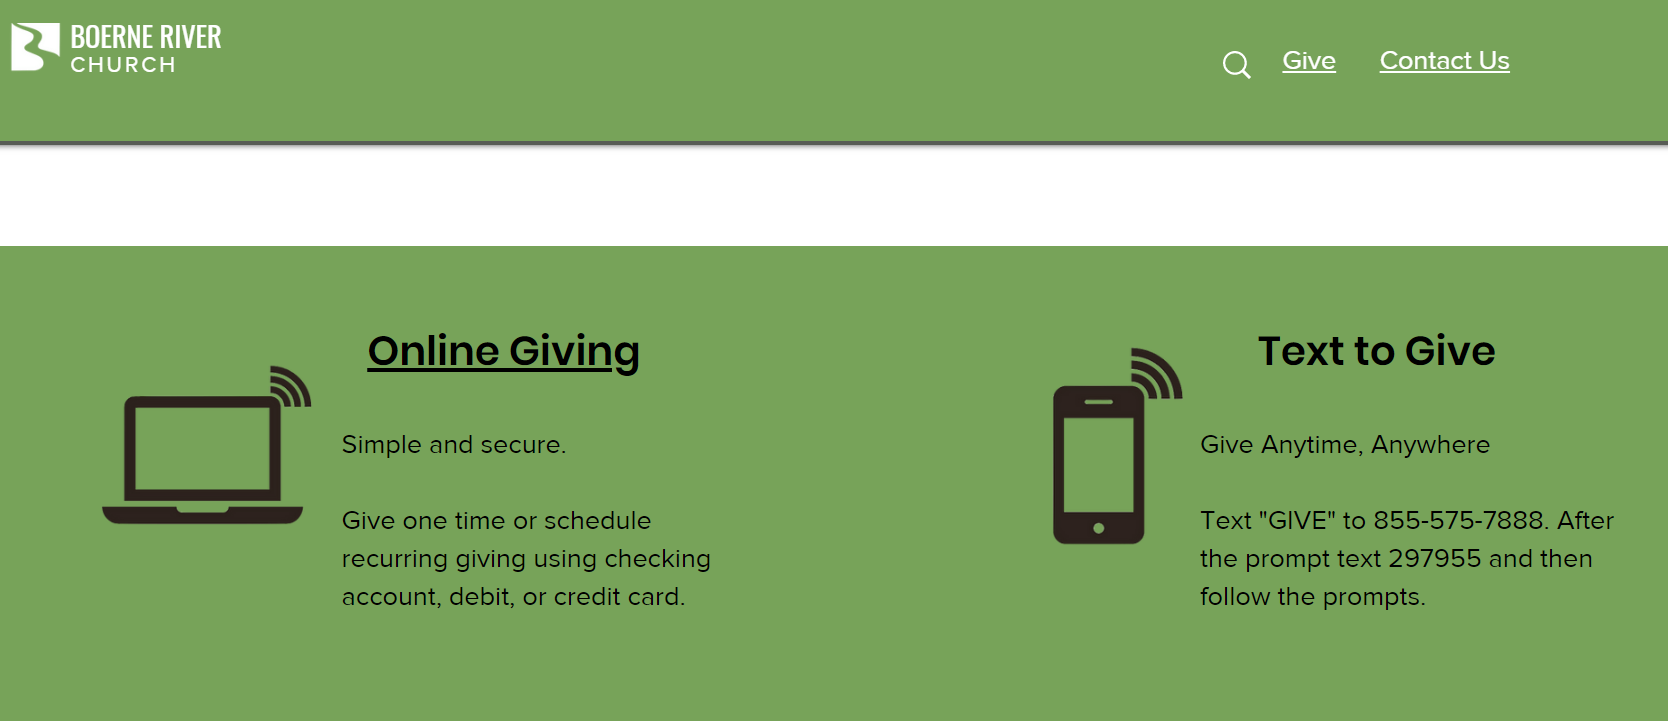 text to give and online giving on church website 